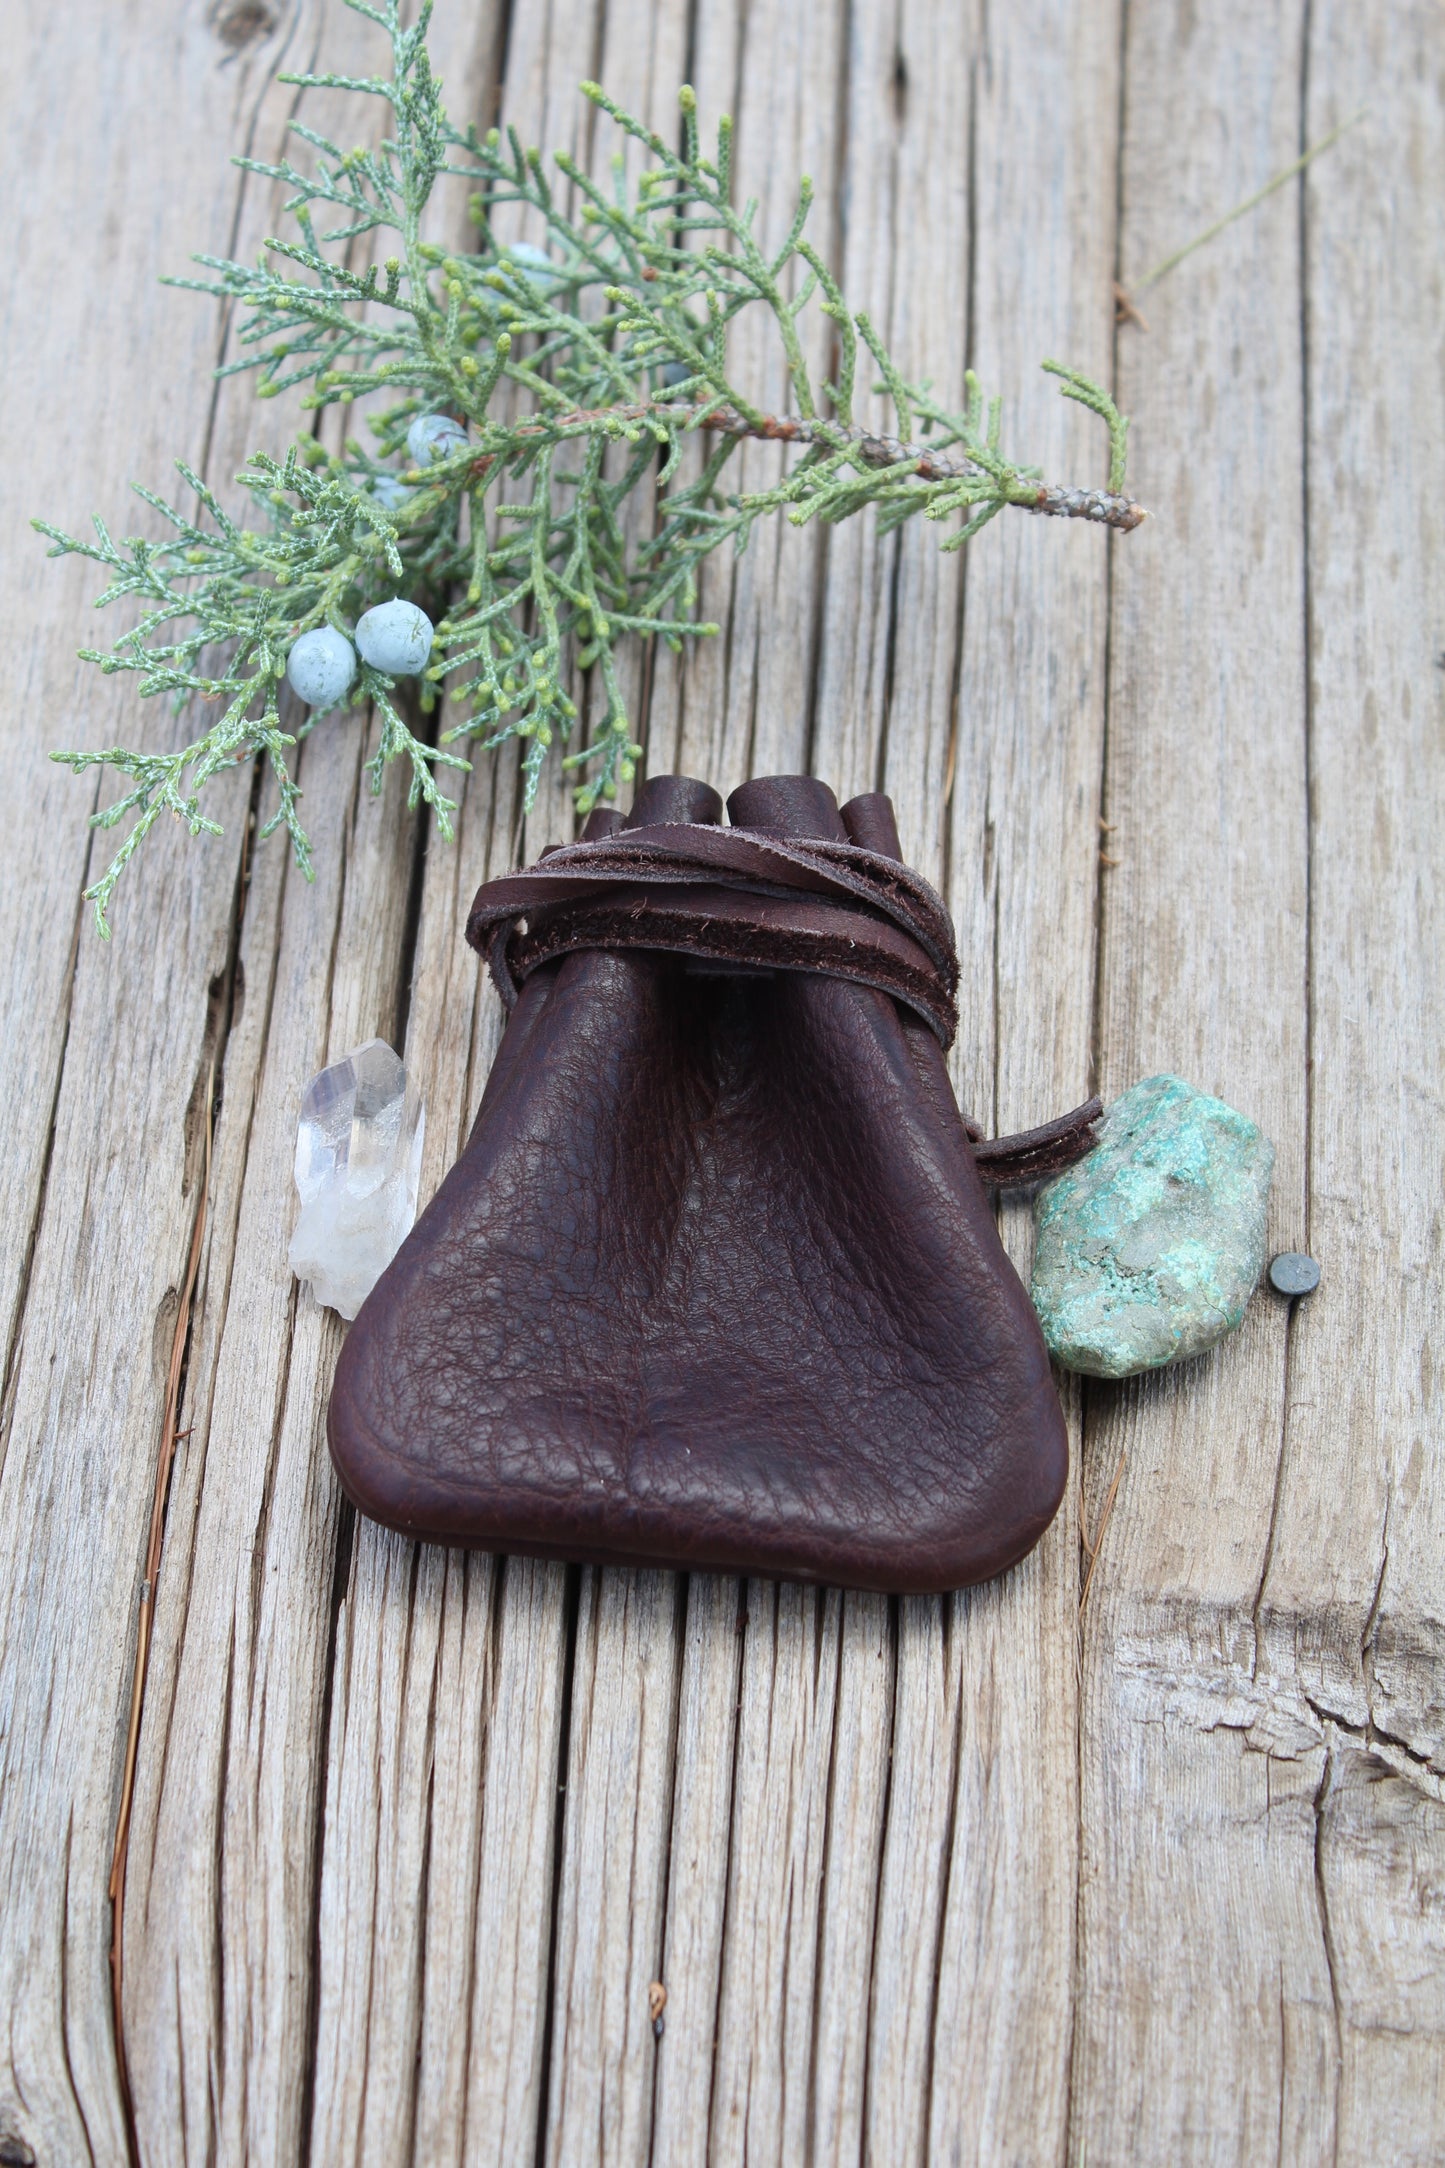 Buffalo medicine bags, leather necklace bags